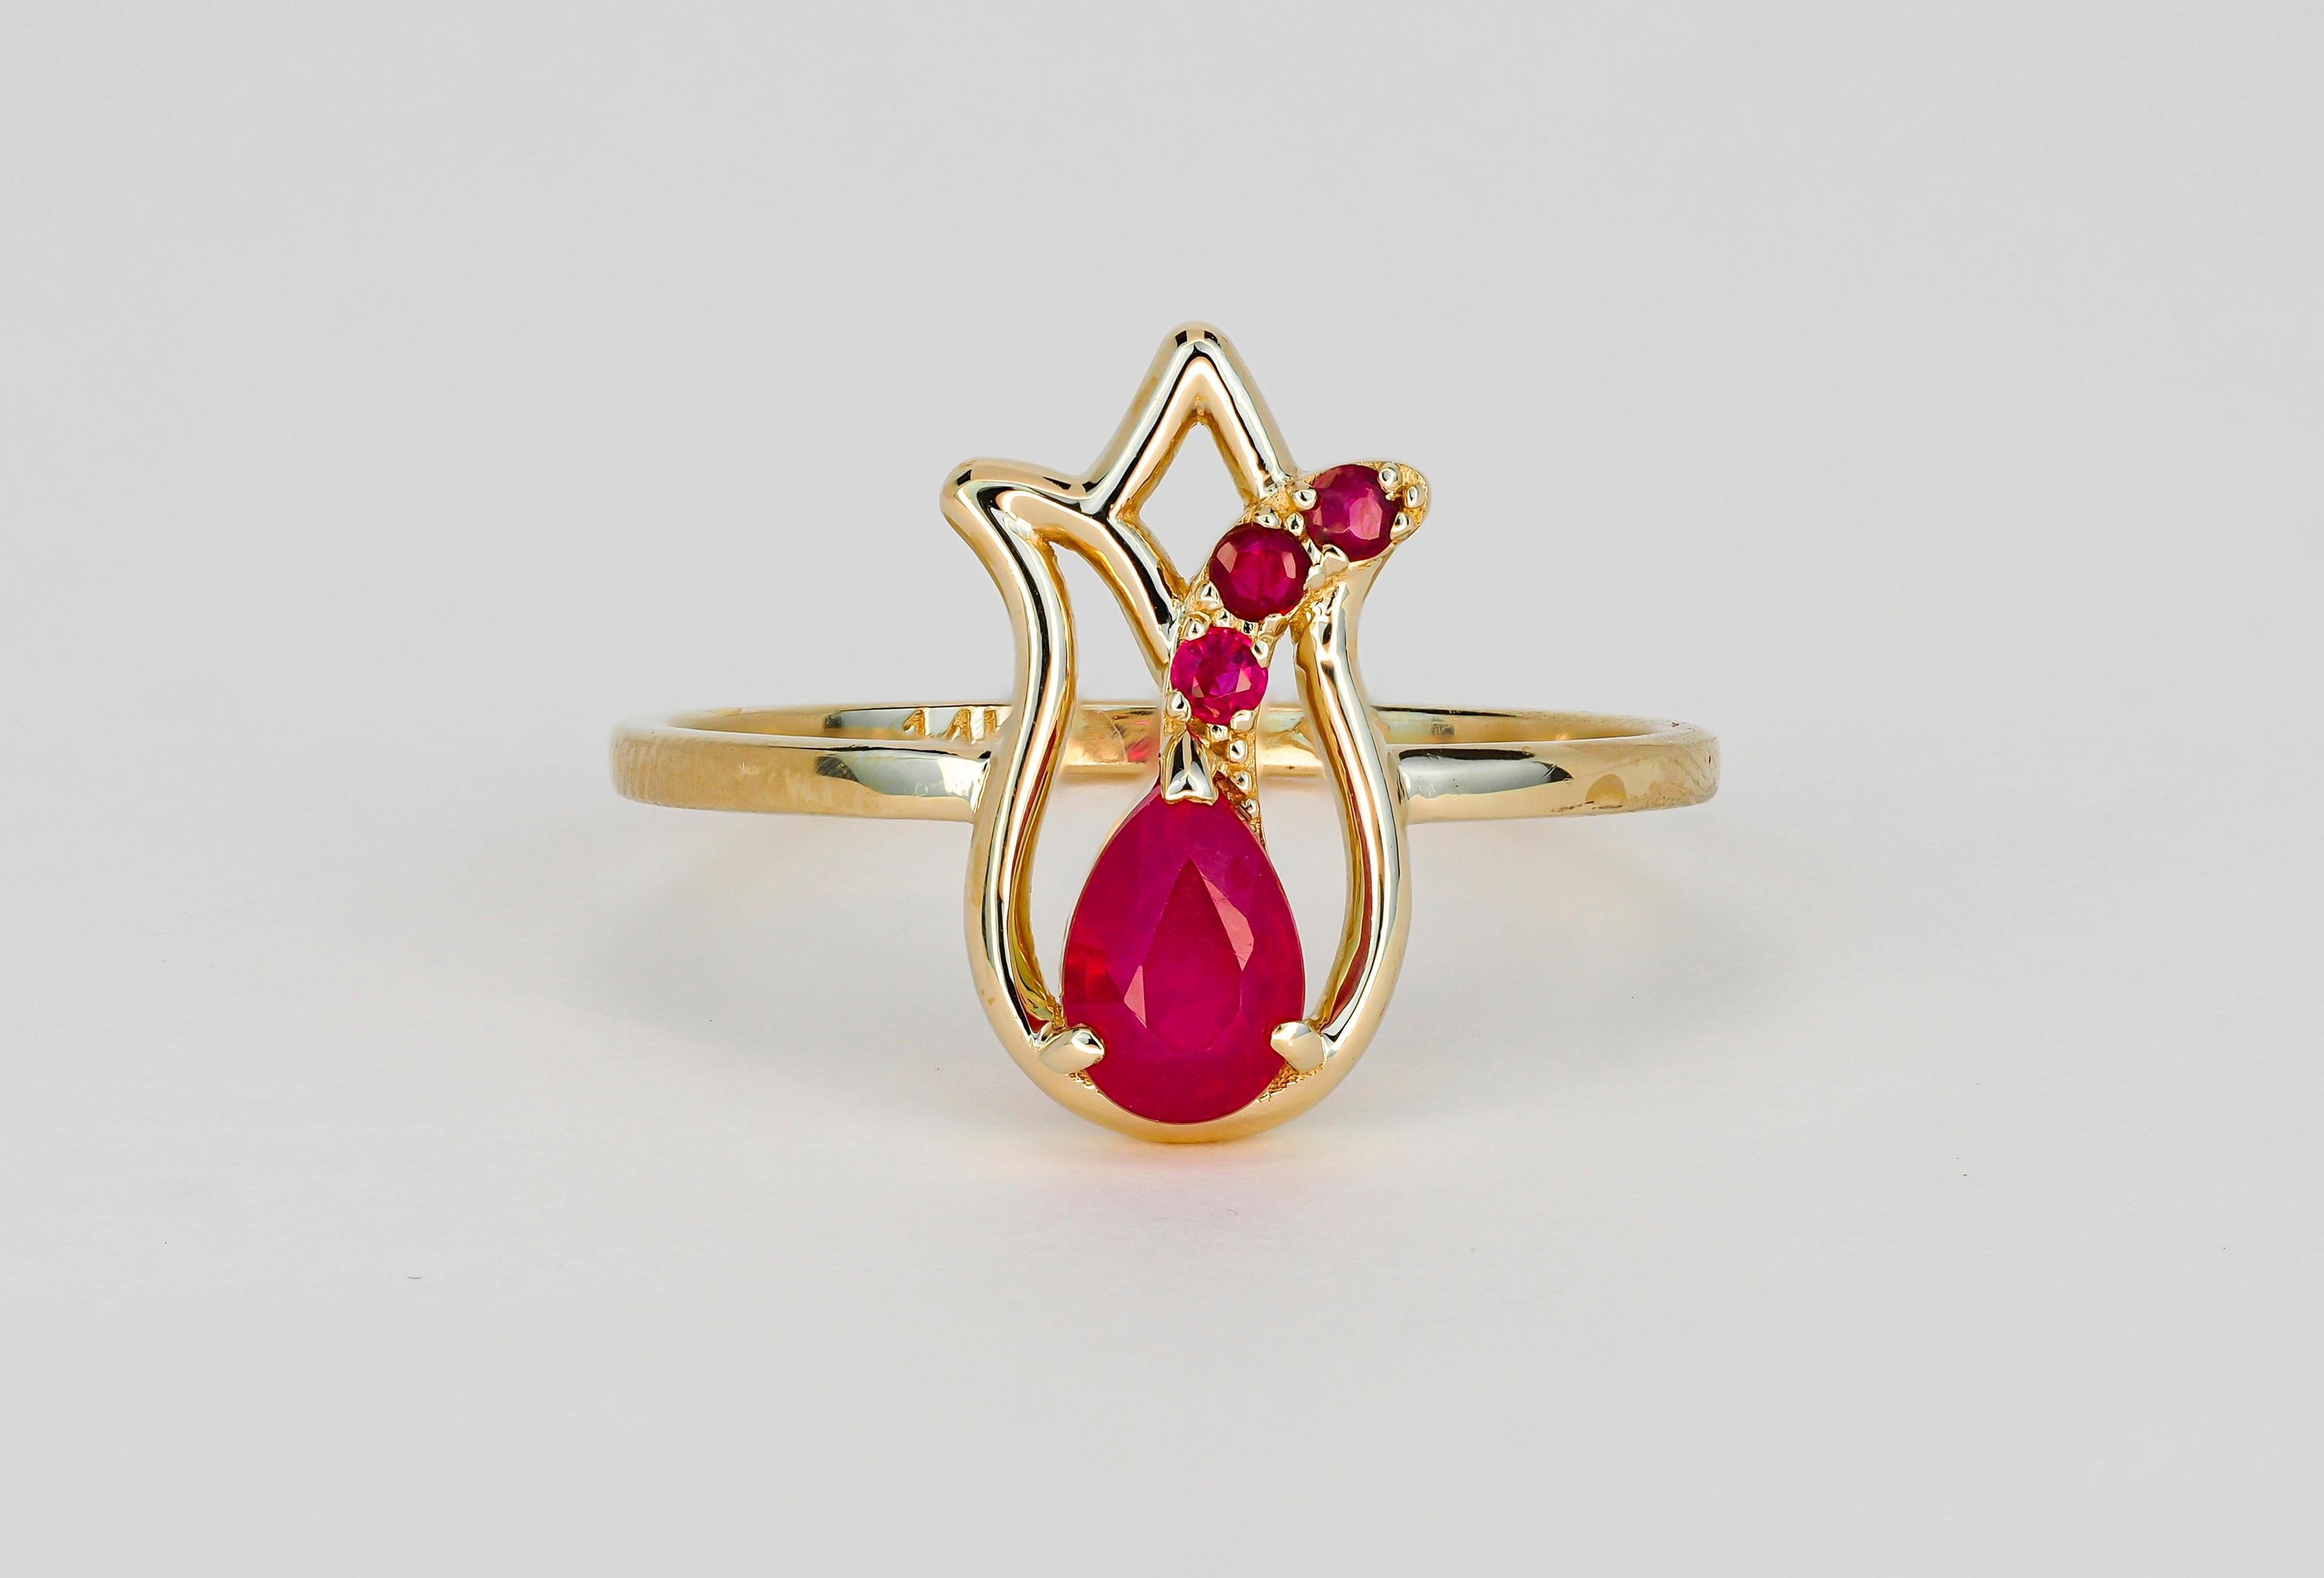 Modern 14 Karat Gold Ring with Ruby and Side Rubies, Gold Tulip Flower Ring